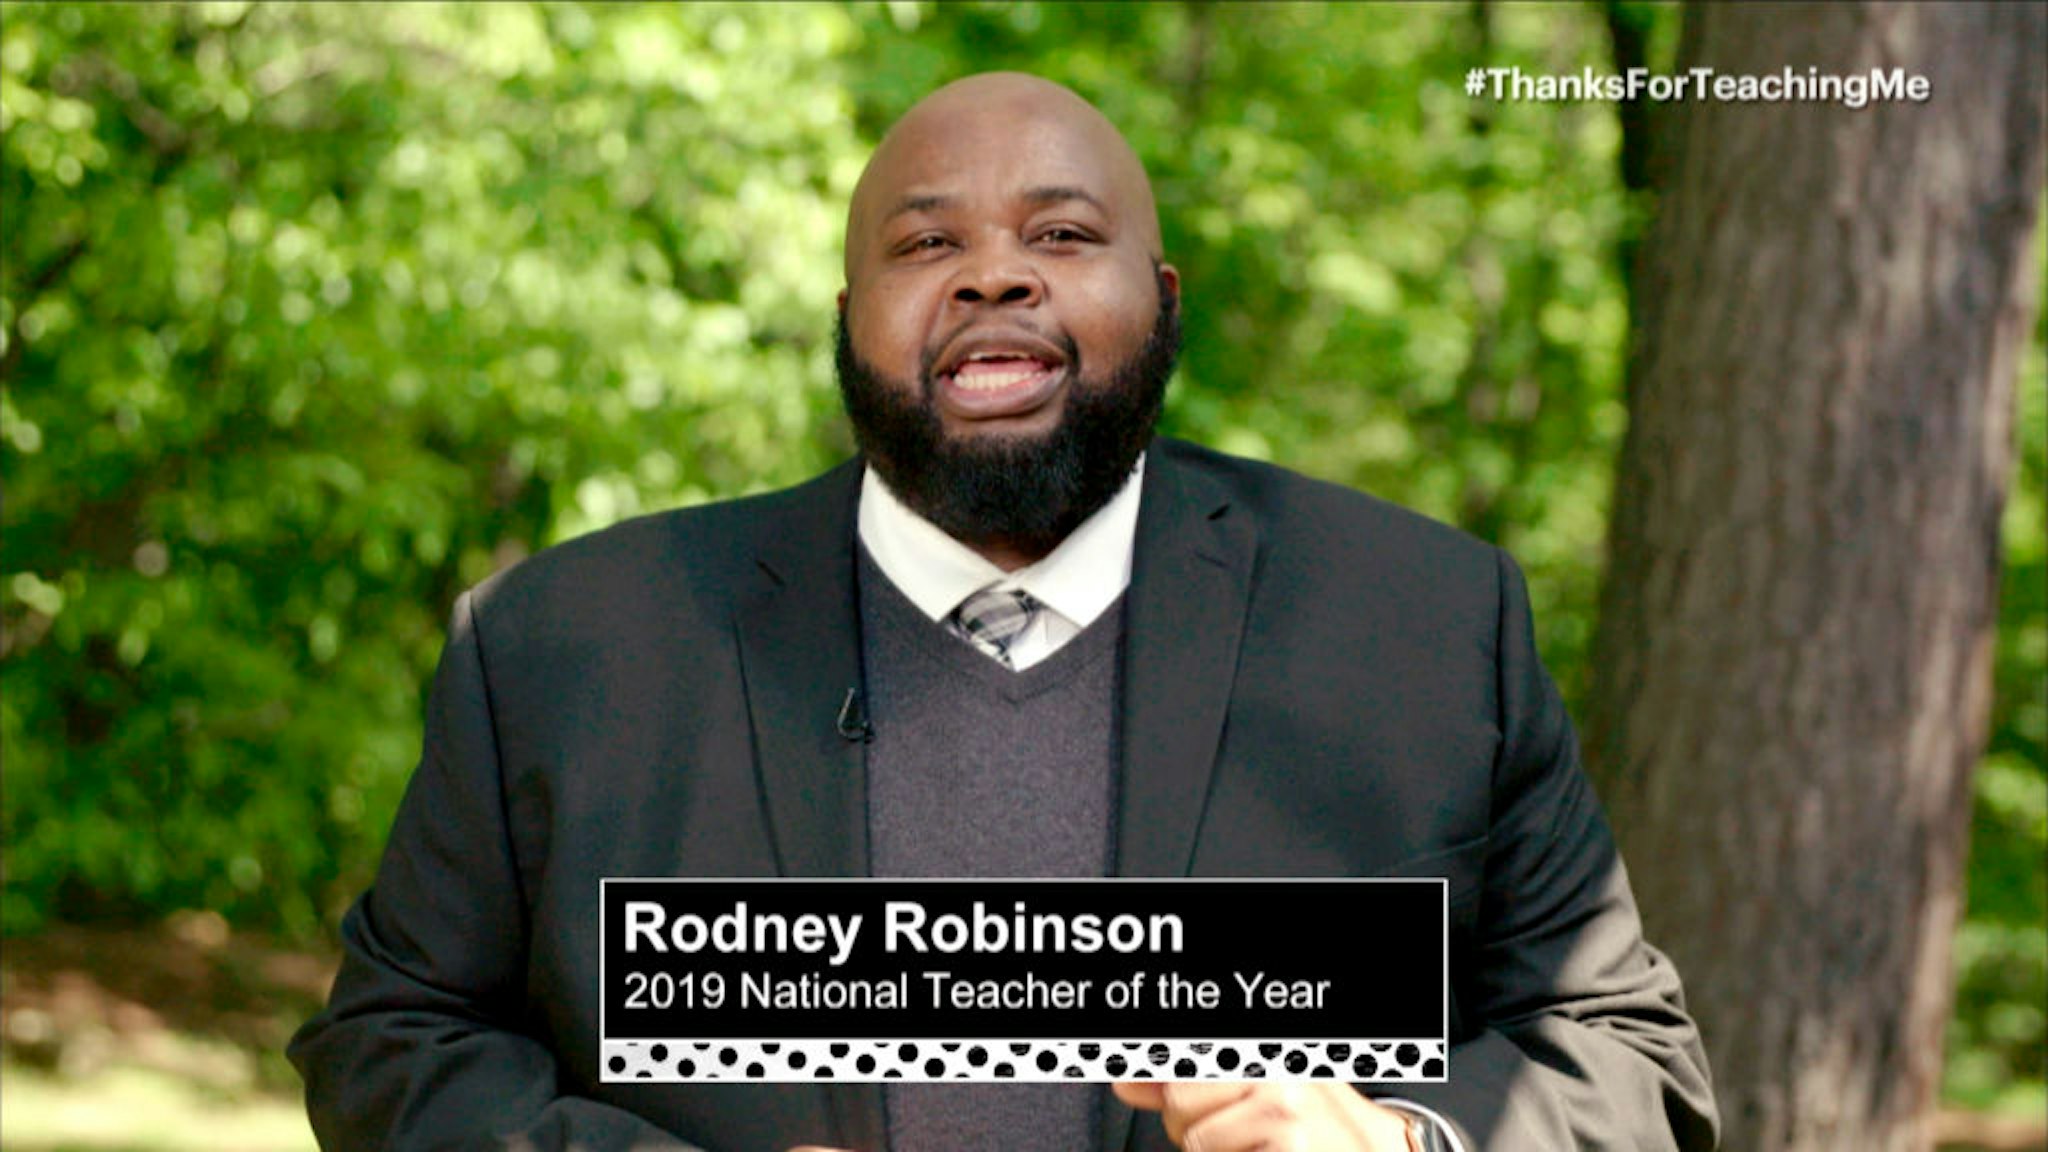 In this screengrab, Rodney Robinson 2019 National Teacher of the Year speaks during Graduate Together: America Honors the High School Class of 2020 on May 16, 2020.